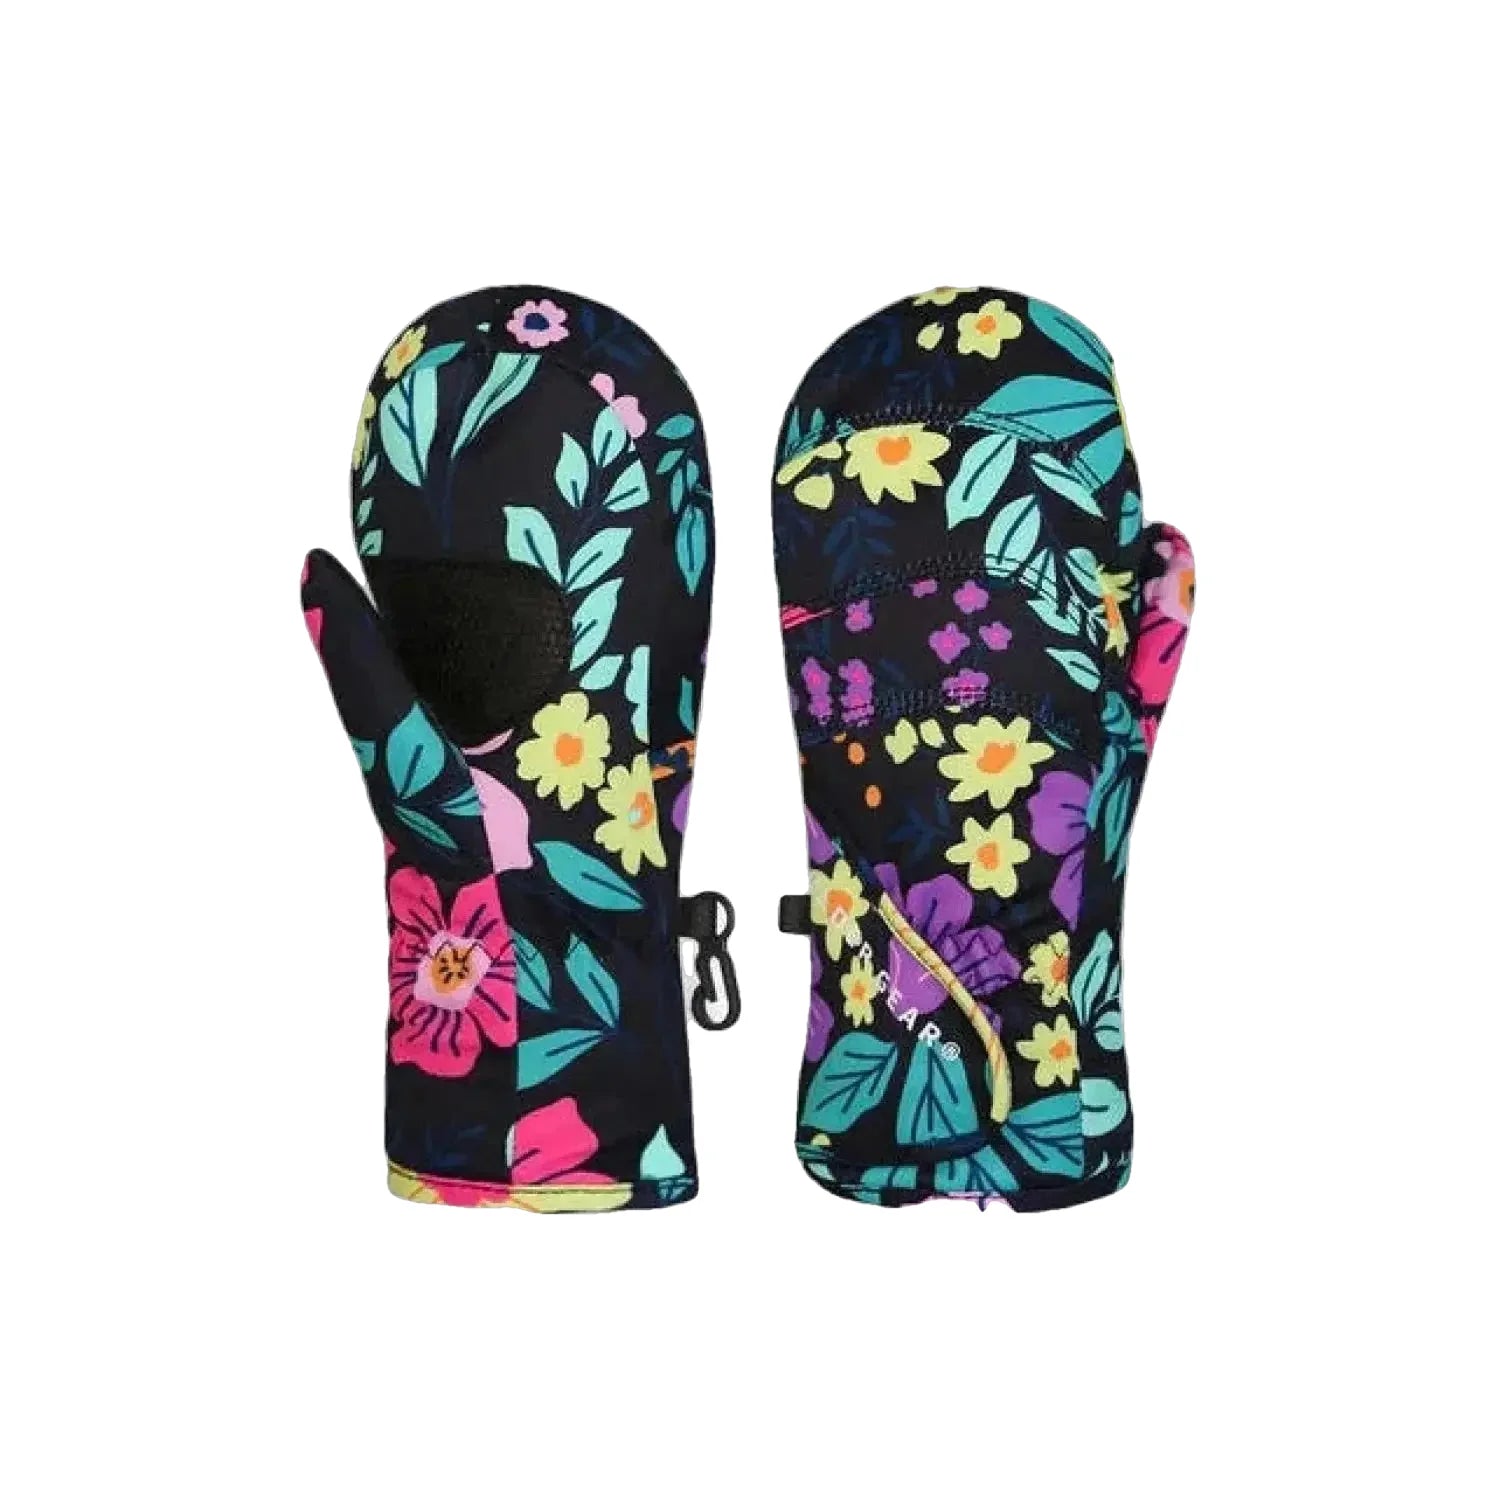 Boulder Gear's Flurry Mittens in Wild Flower.  Black background with purple, yellow, and pink flowers with green leaves.